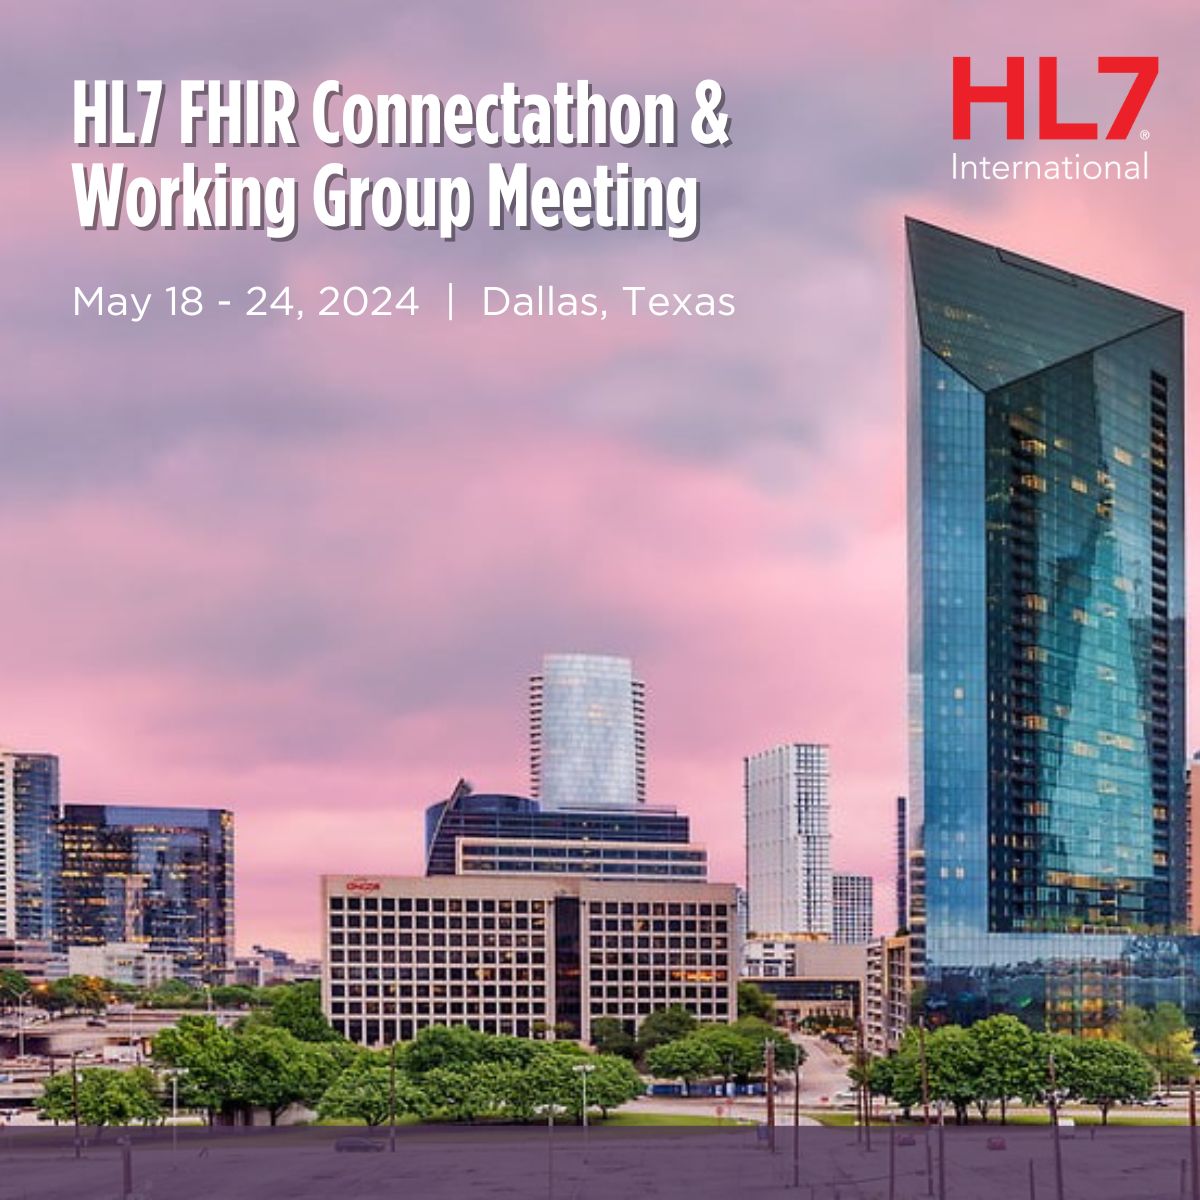 On May 19, Infoway's Allana Cameron will present to the International Council during the 2024 @HL7 #FHIR Connectathon & Working Group Meeting. She will provide an overview of Canada's Patient Summary work and how it relates to the International Patient Summary.